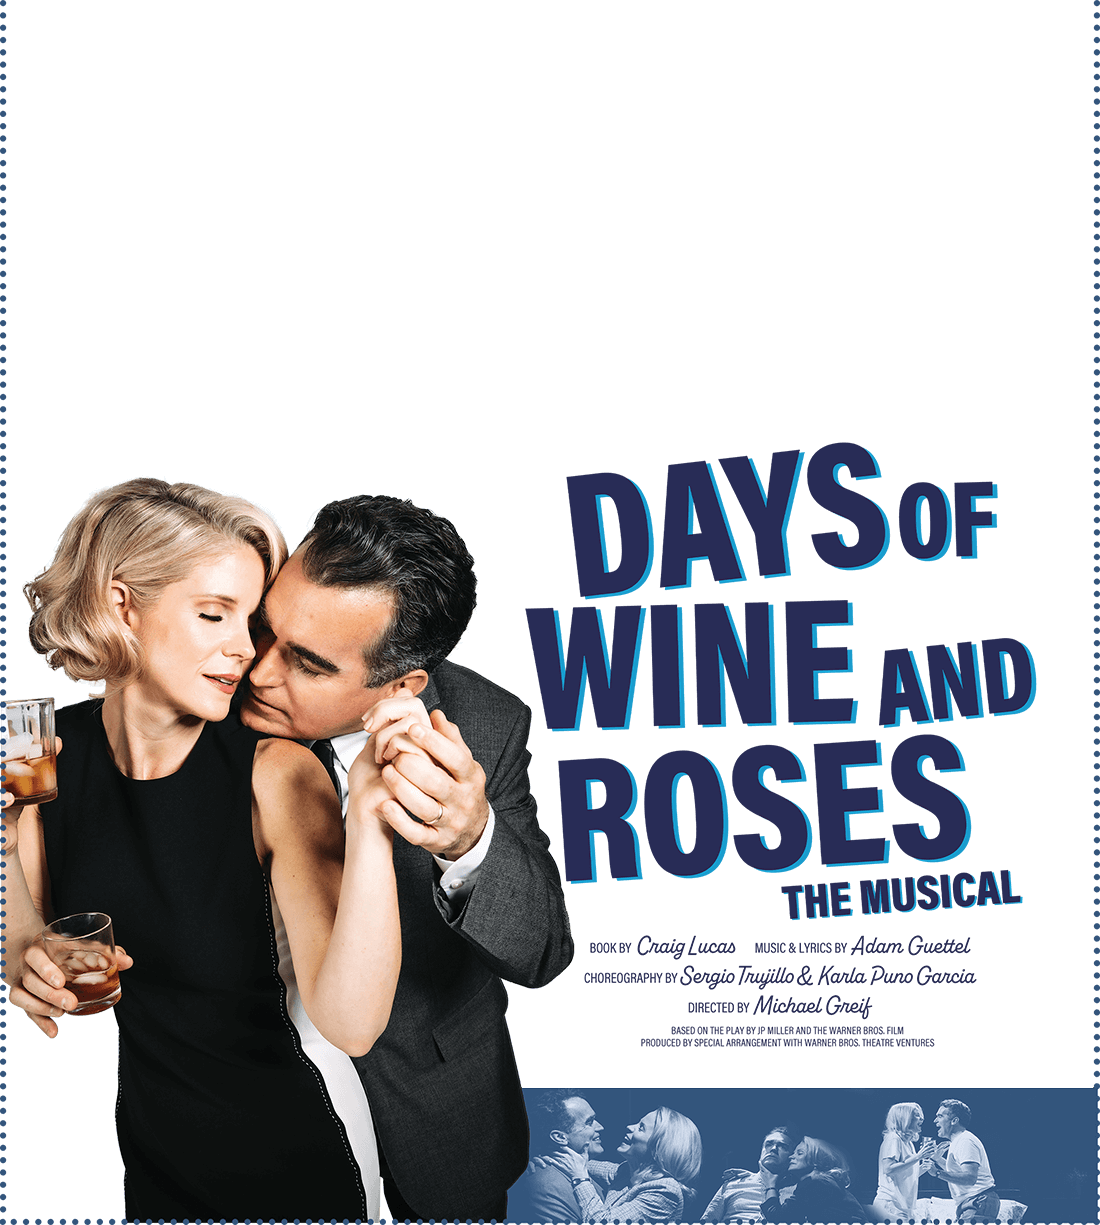 DAYS OF WINE AND ROSES musical limited Broadway engagement beginning in January